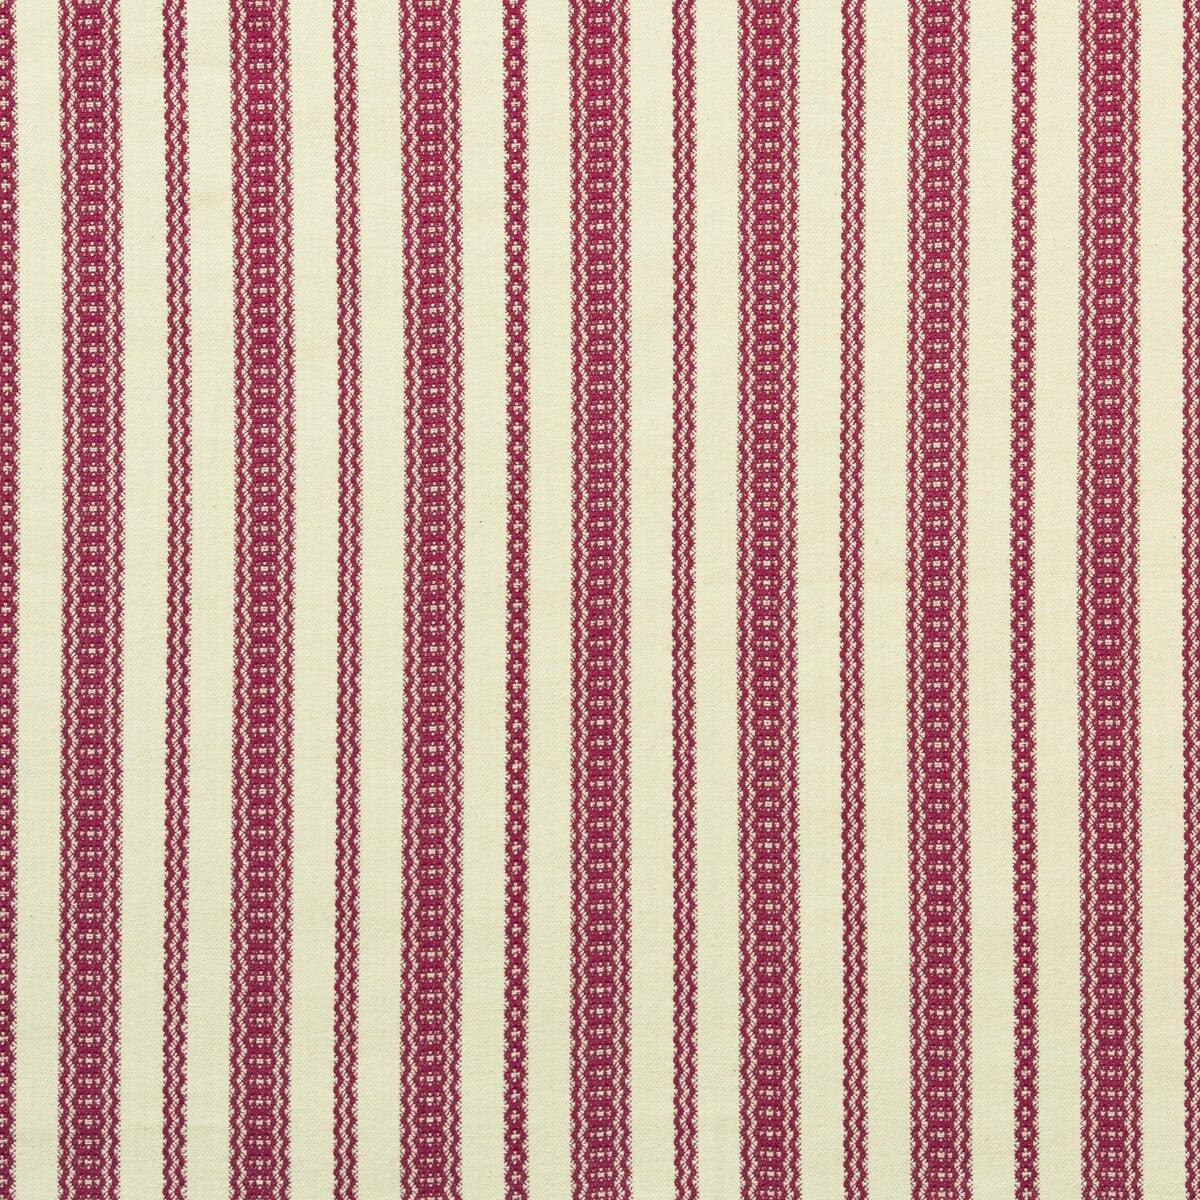 Payson fabric in red color - pattern BFC-3676.909.0 - by Lee Jofa in the Blithfield collection